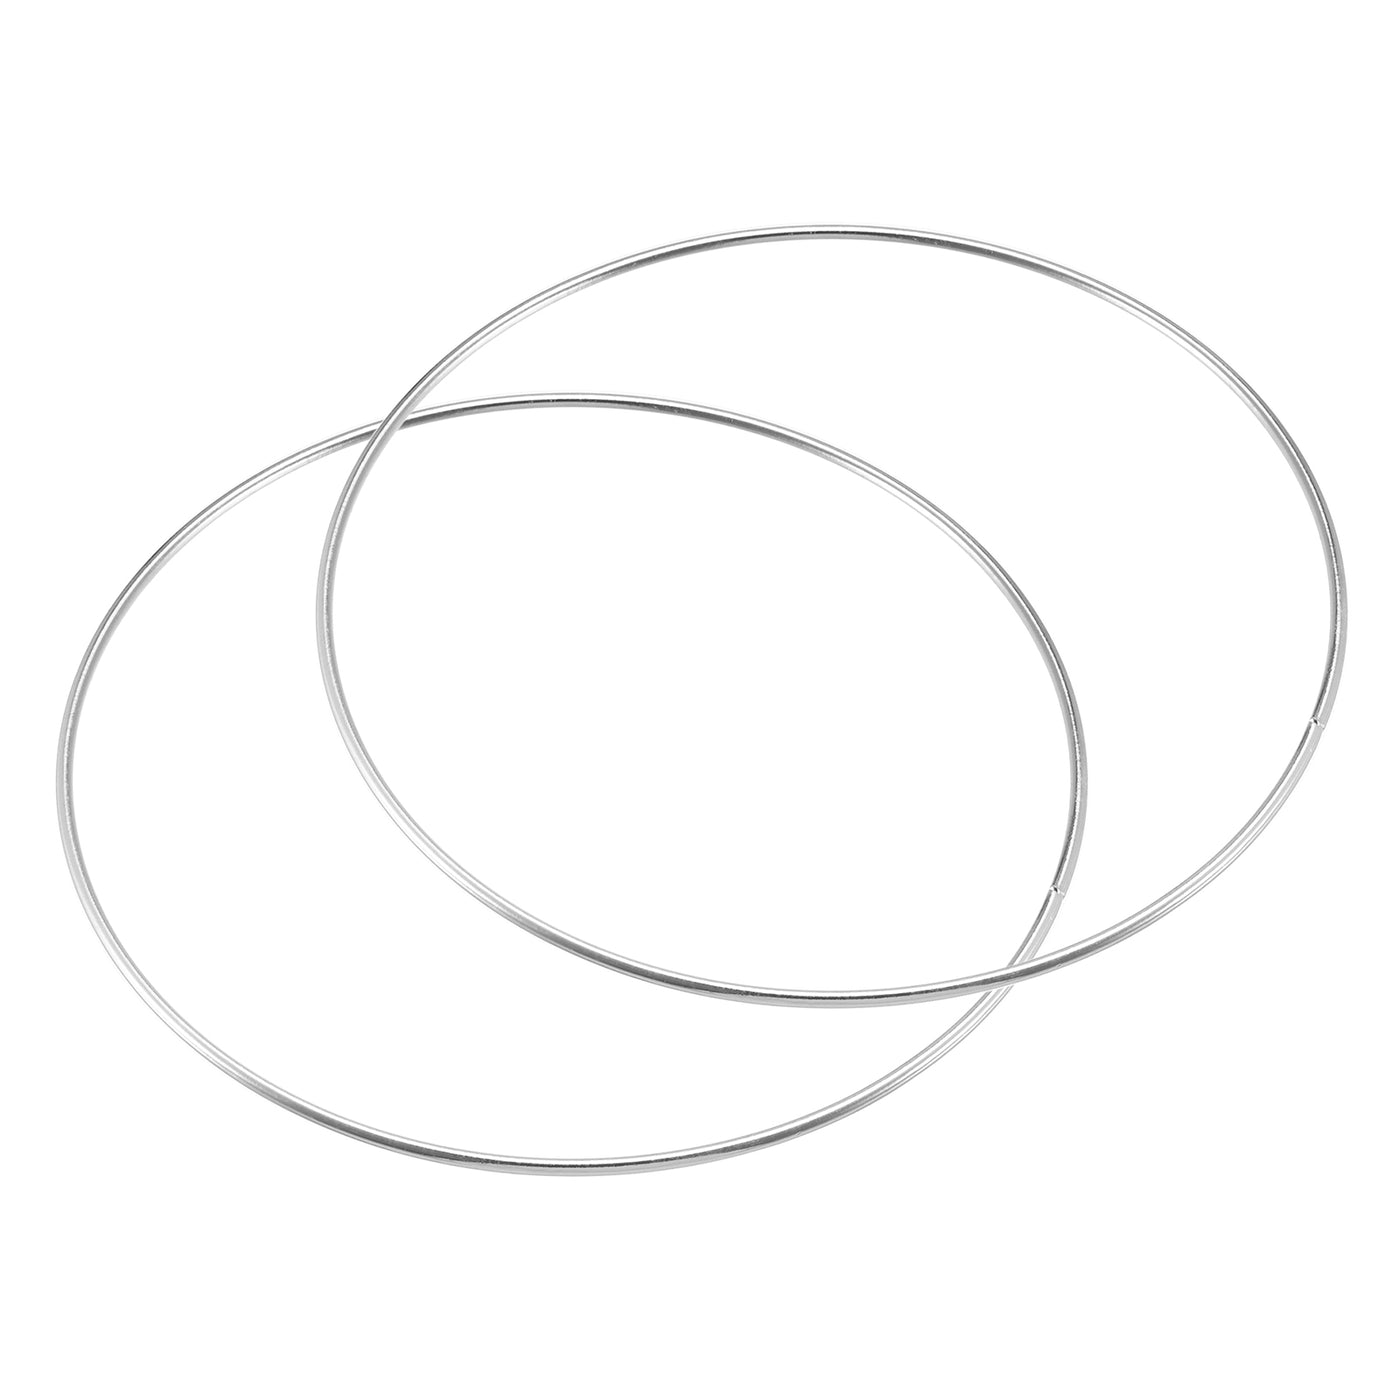 uxcell Uxcell 160mm(6.3") OD Metal O Ring Non-Welded Craft Hoops for DIY Silver Tone 2pcs